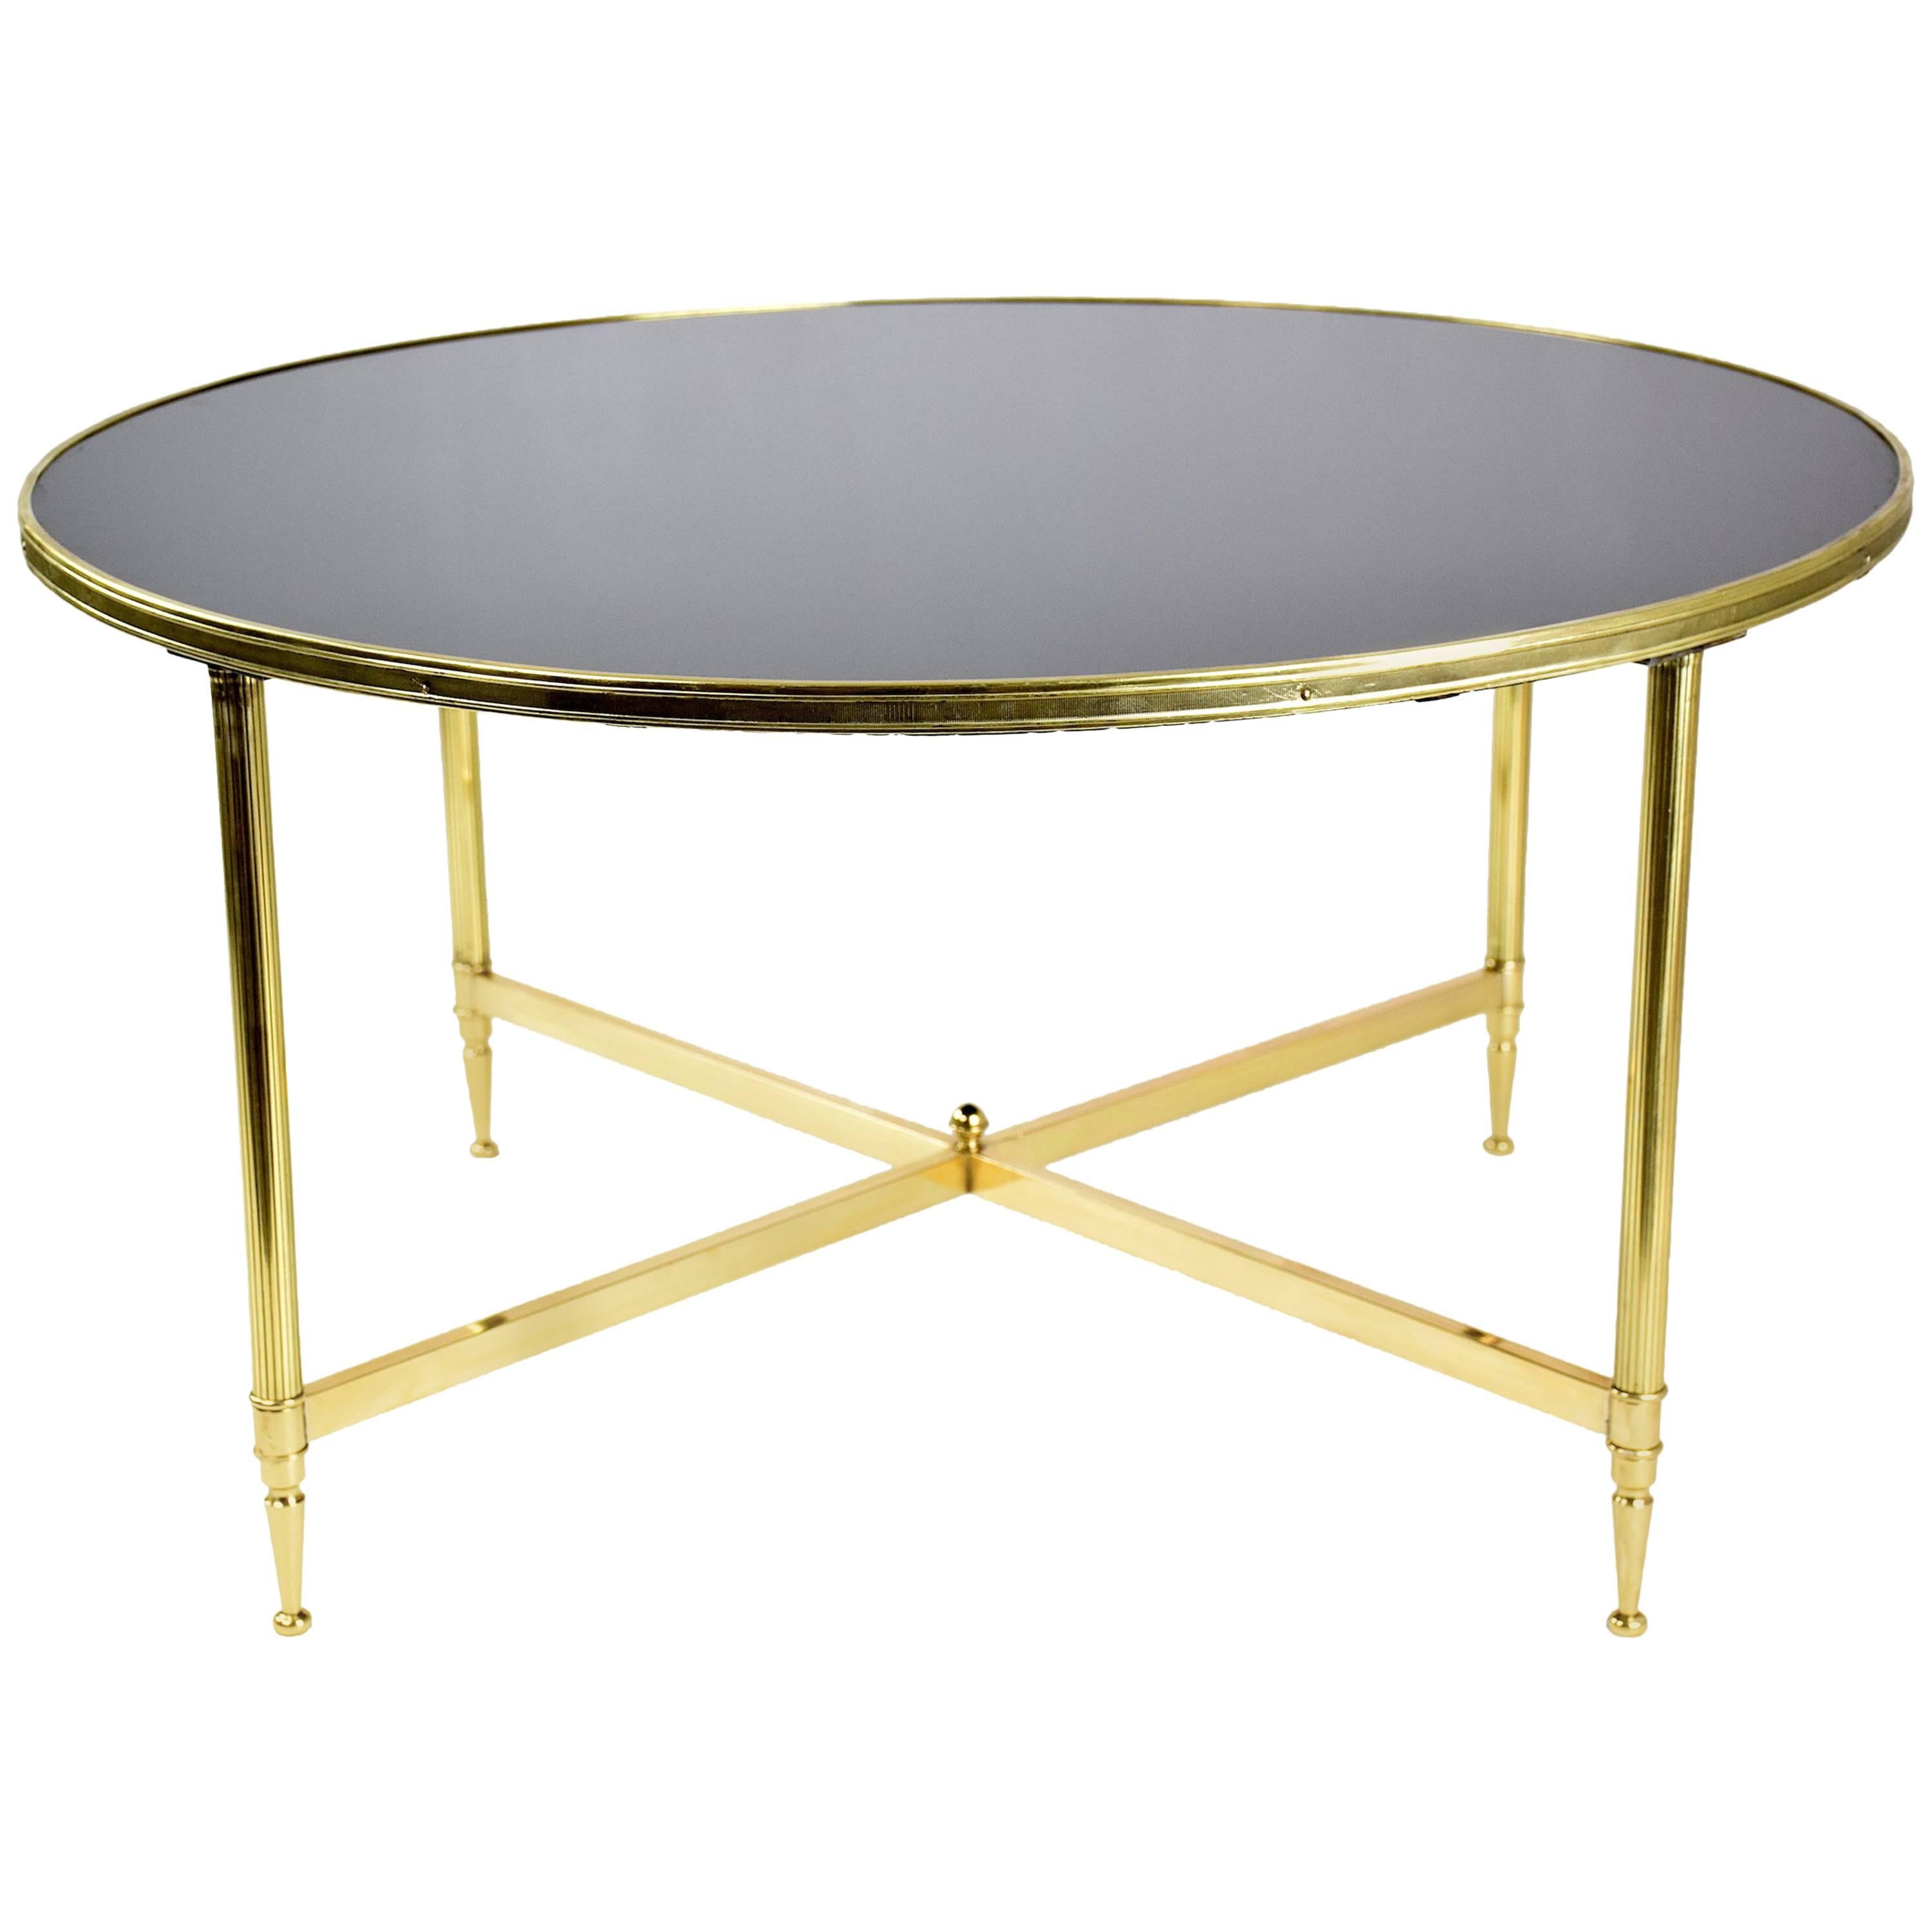 20th century vintage Hollywood Regency style French midcentury circular coffee or side table attributed to Maison Jansen composed of an intricate bronze cross-shaped structure and its original black tinted glass tabletop.
 
France, circa 1970s.